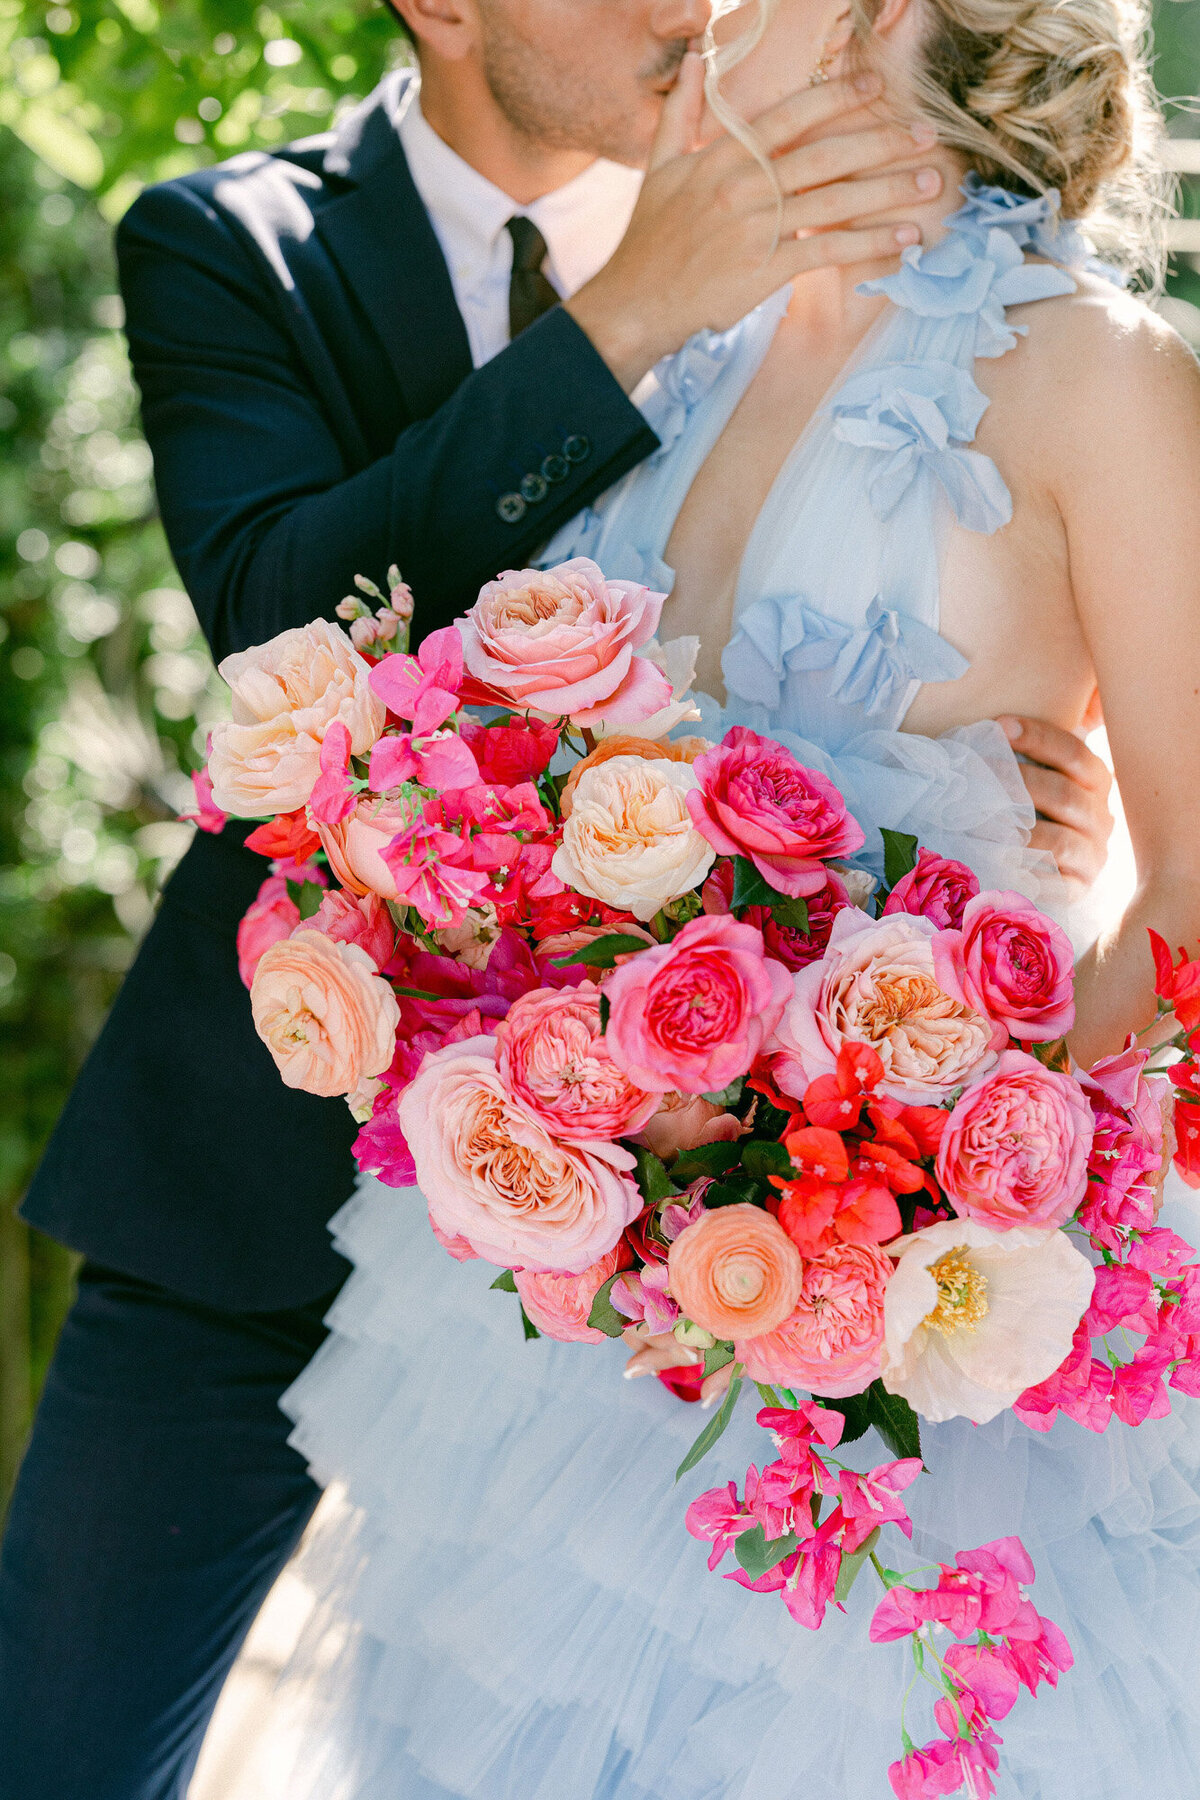 Couple kissing each other while girl holds a pink floral bouquets